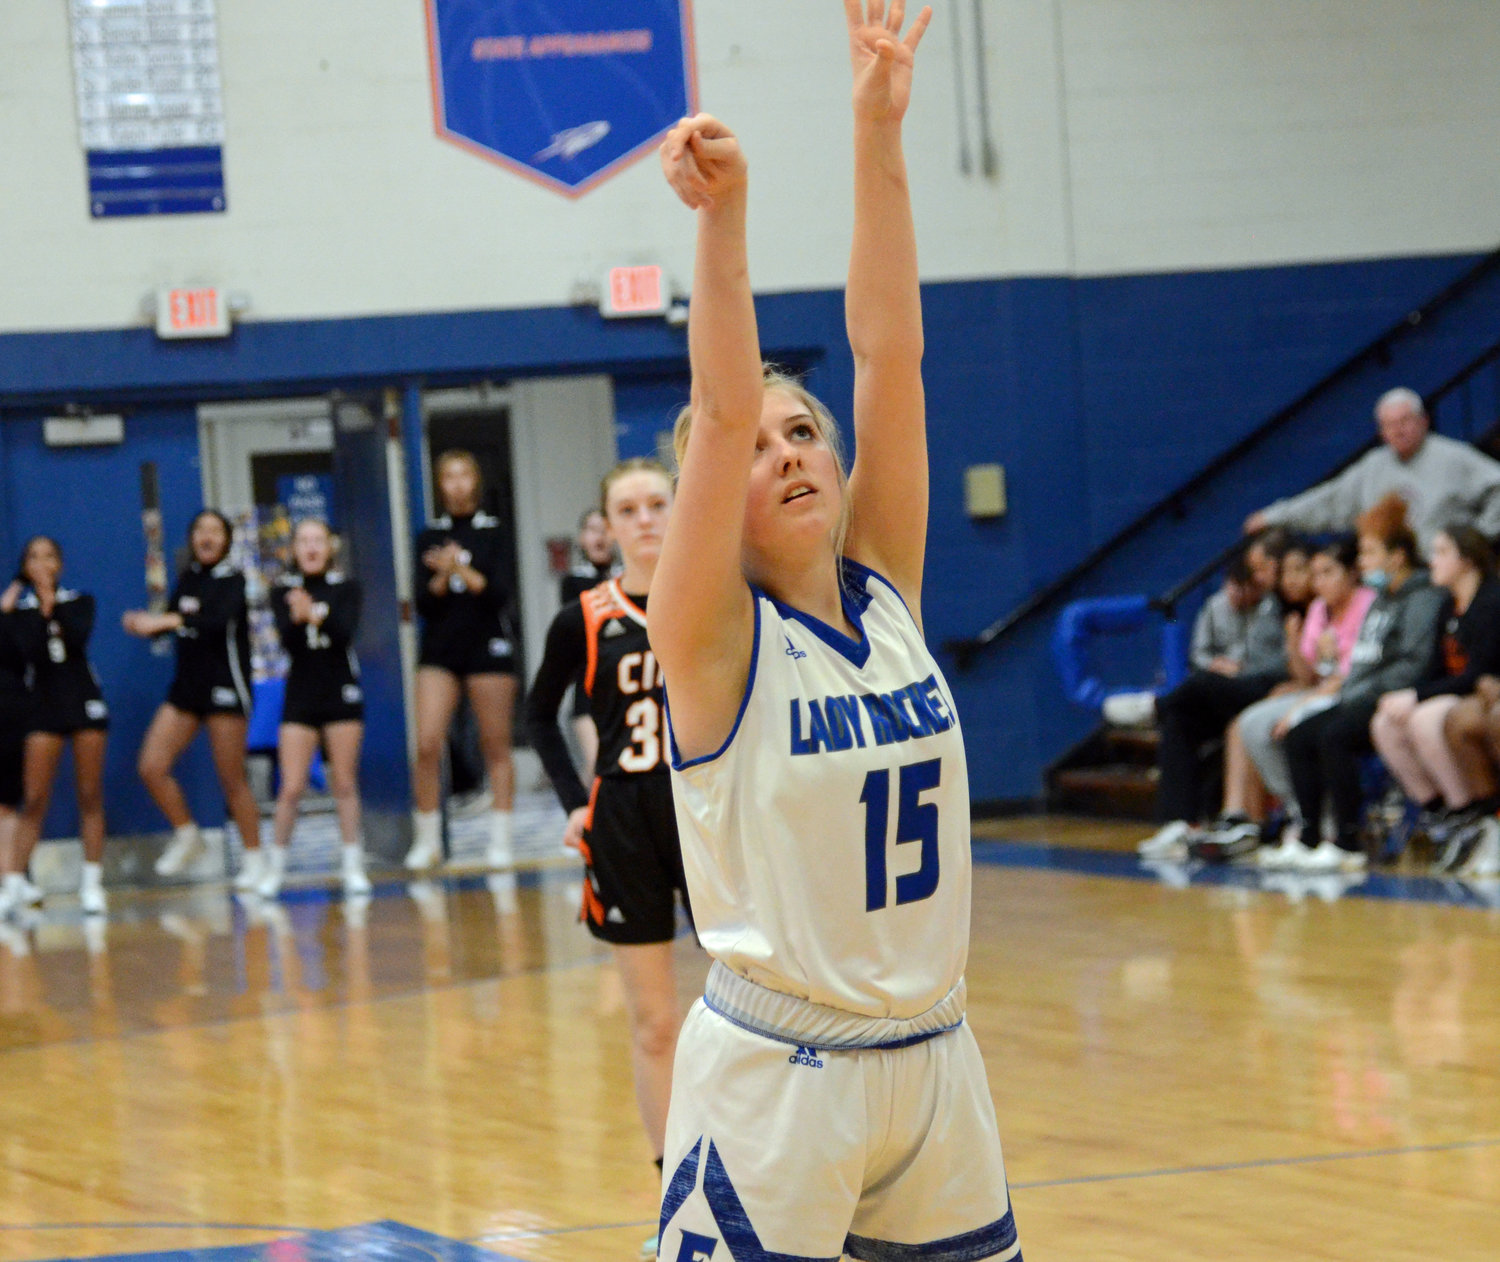 Senior Megan Mealer hit some crucial free throws down the stretch for the Lady Rockets.